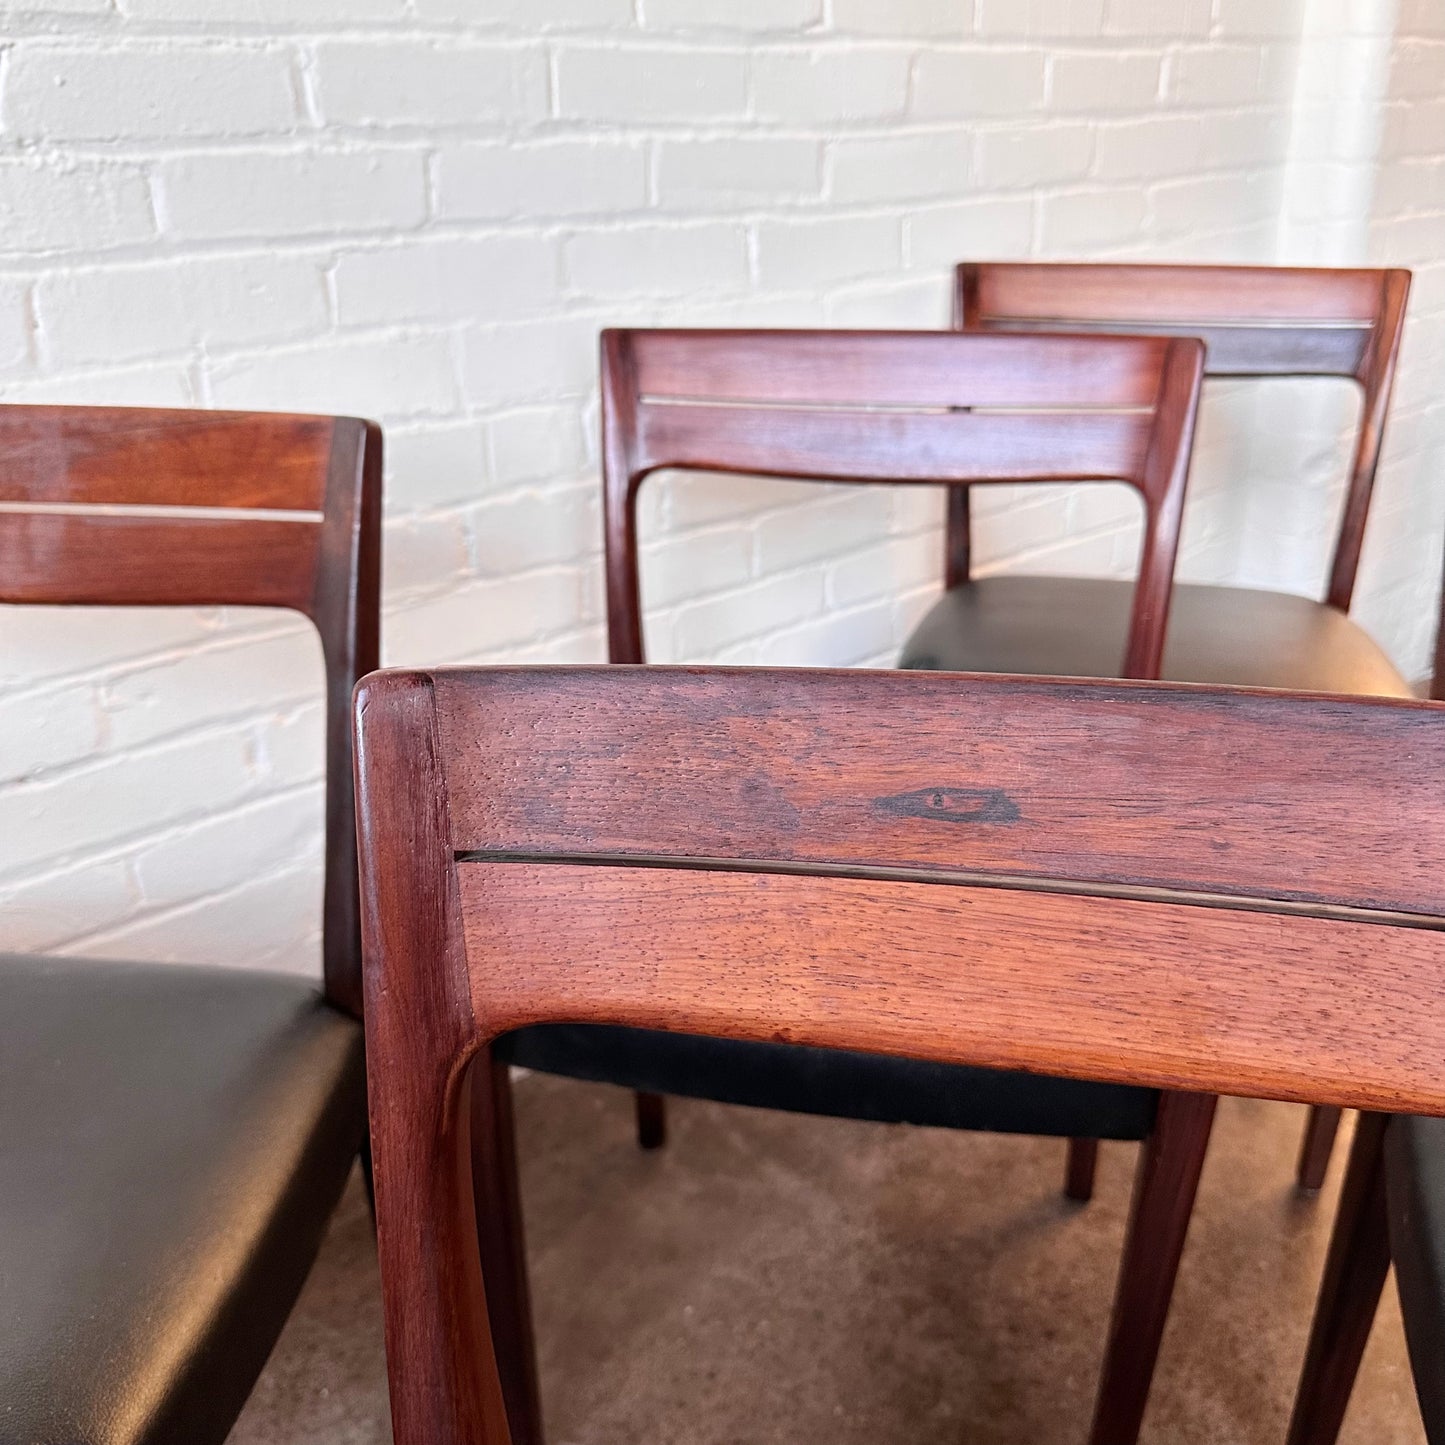 SET OF 8 SVEGARDS MARKARYD SWEDISH ROSEWOOD DINING CHAIRS - RESTORED / REUPHOLSTERED